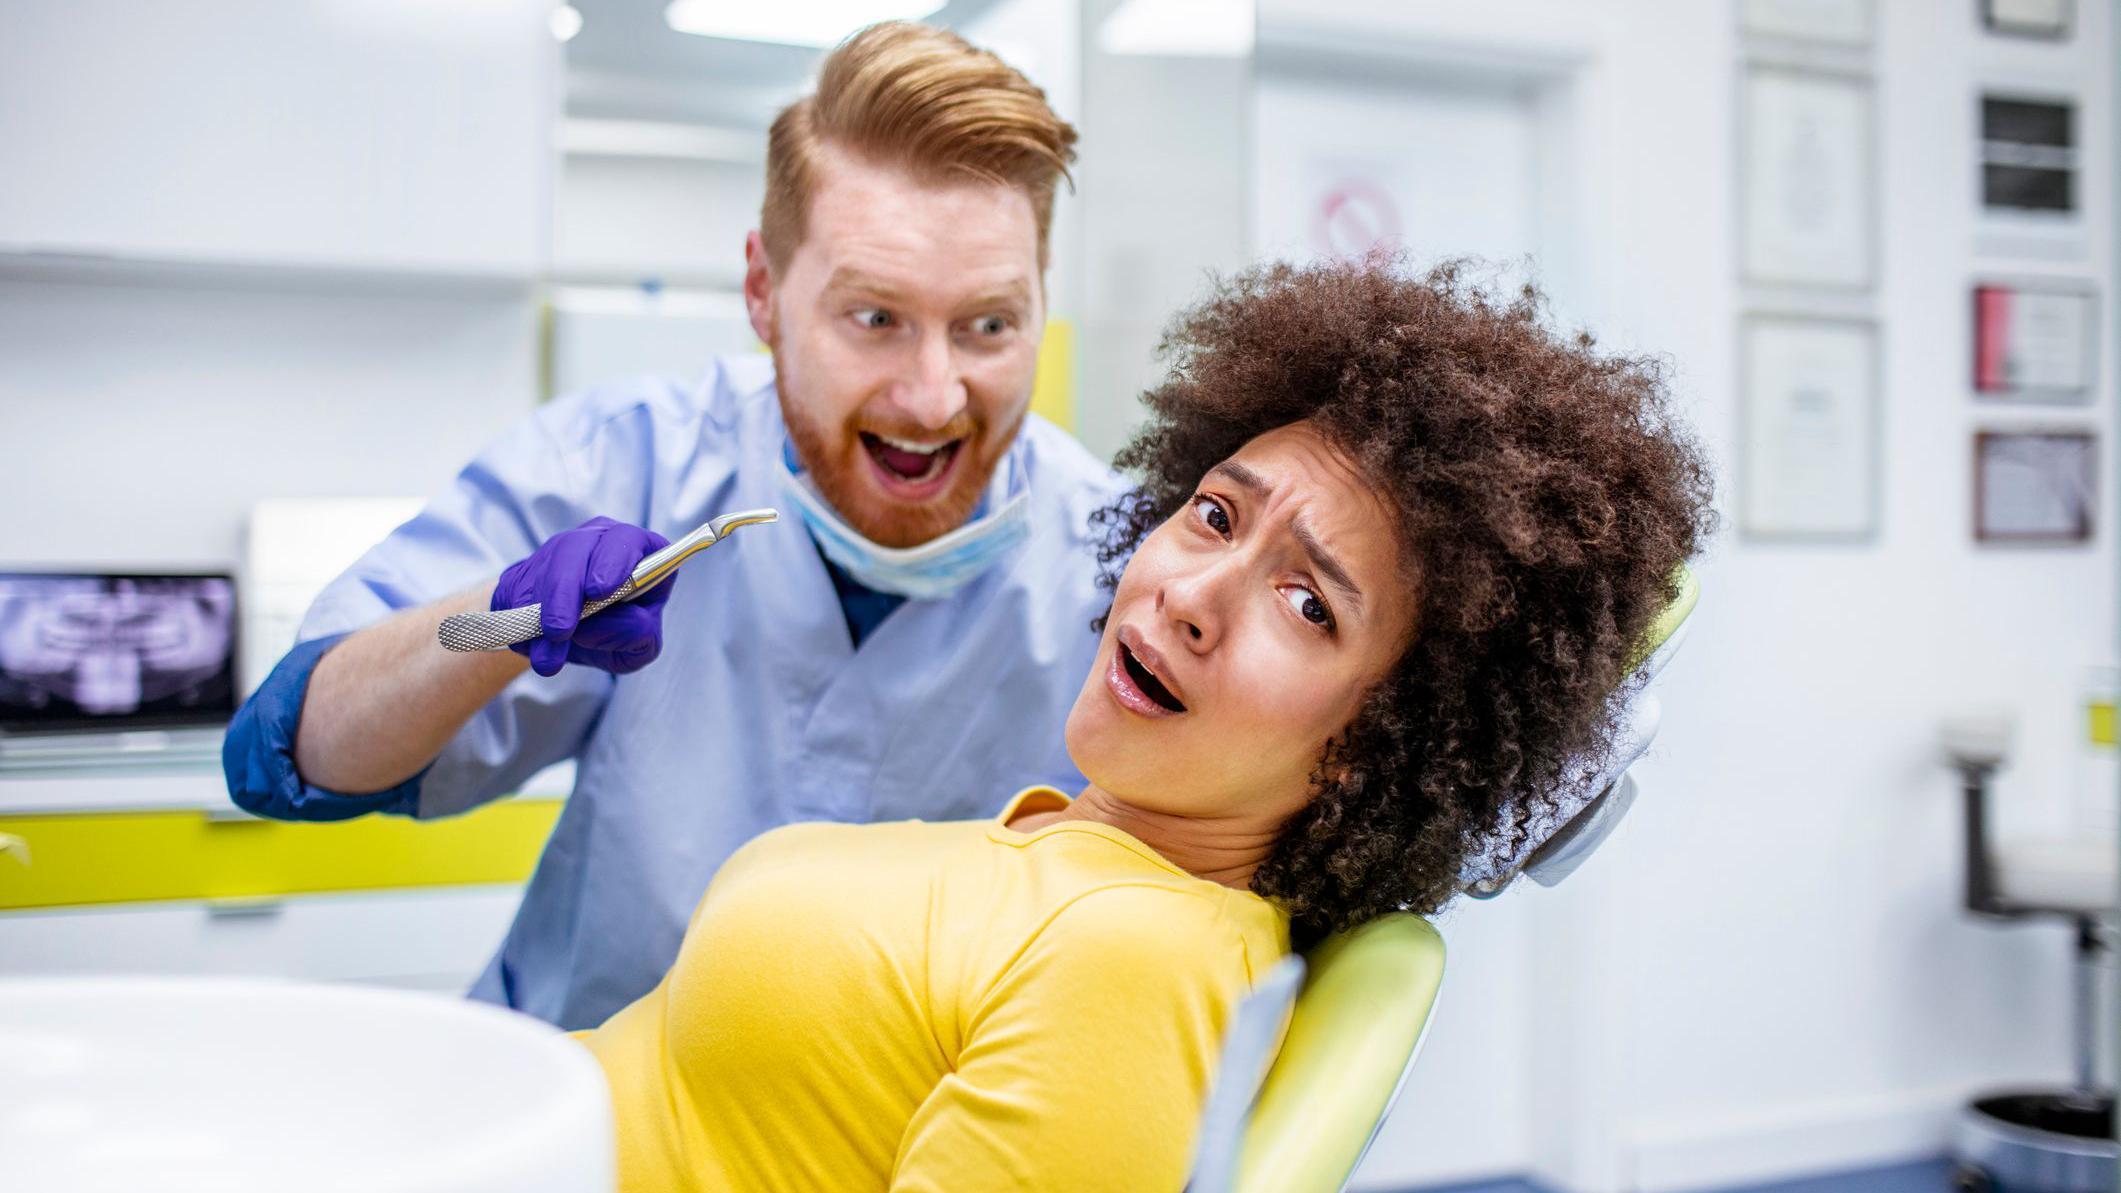 A woman on a dentist's chair looks scared as the dentist approaches her holding a pair of pliers